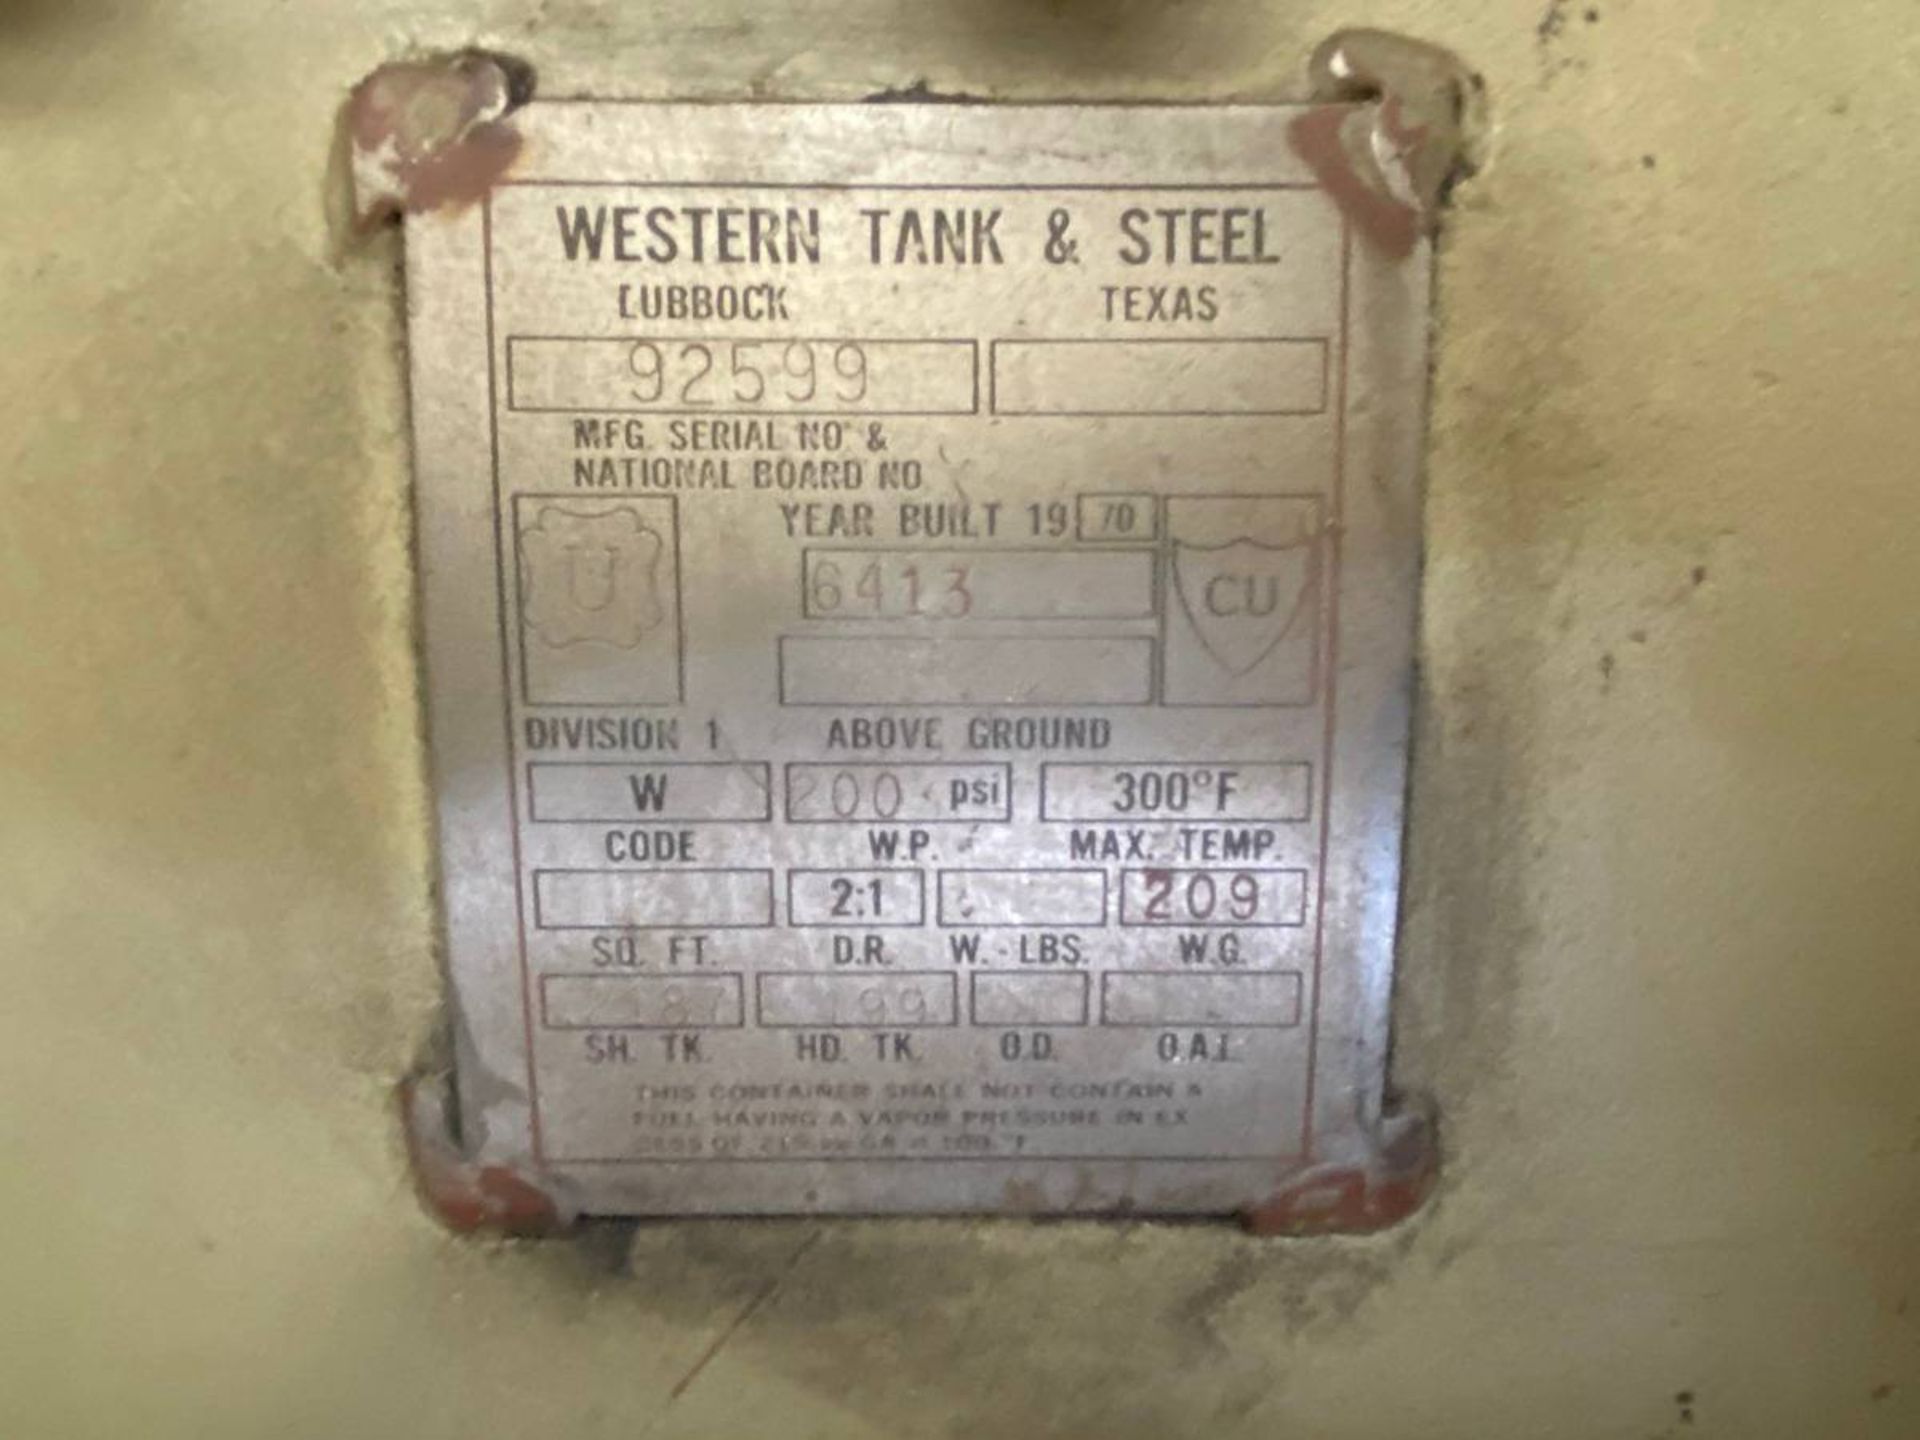 1970 Western Tank And Steel 92599 Air Tank 2187 Sq. Ft, 200 Psi, - Image 3 of 3